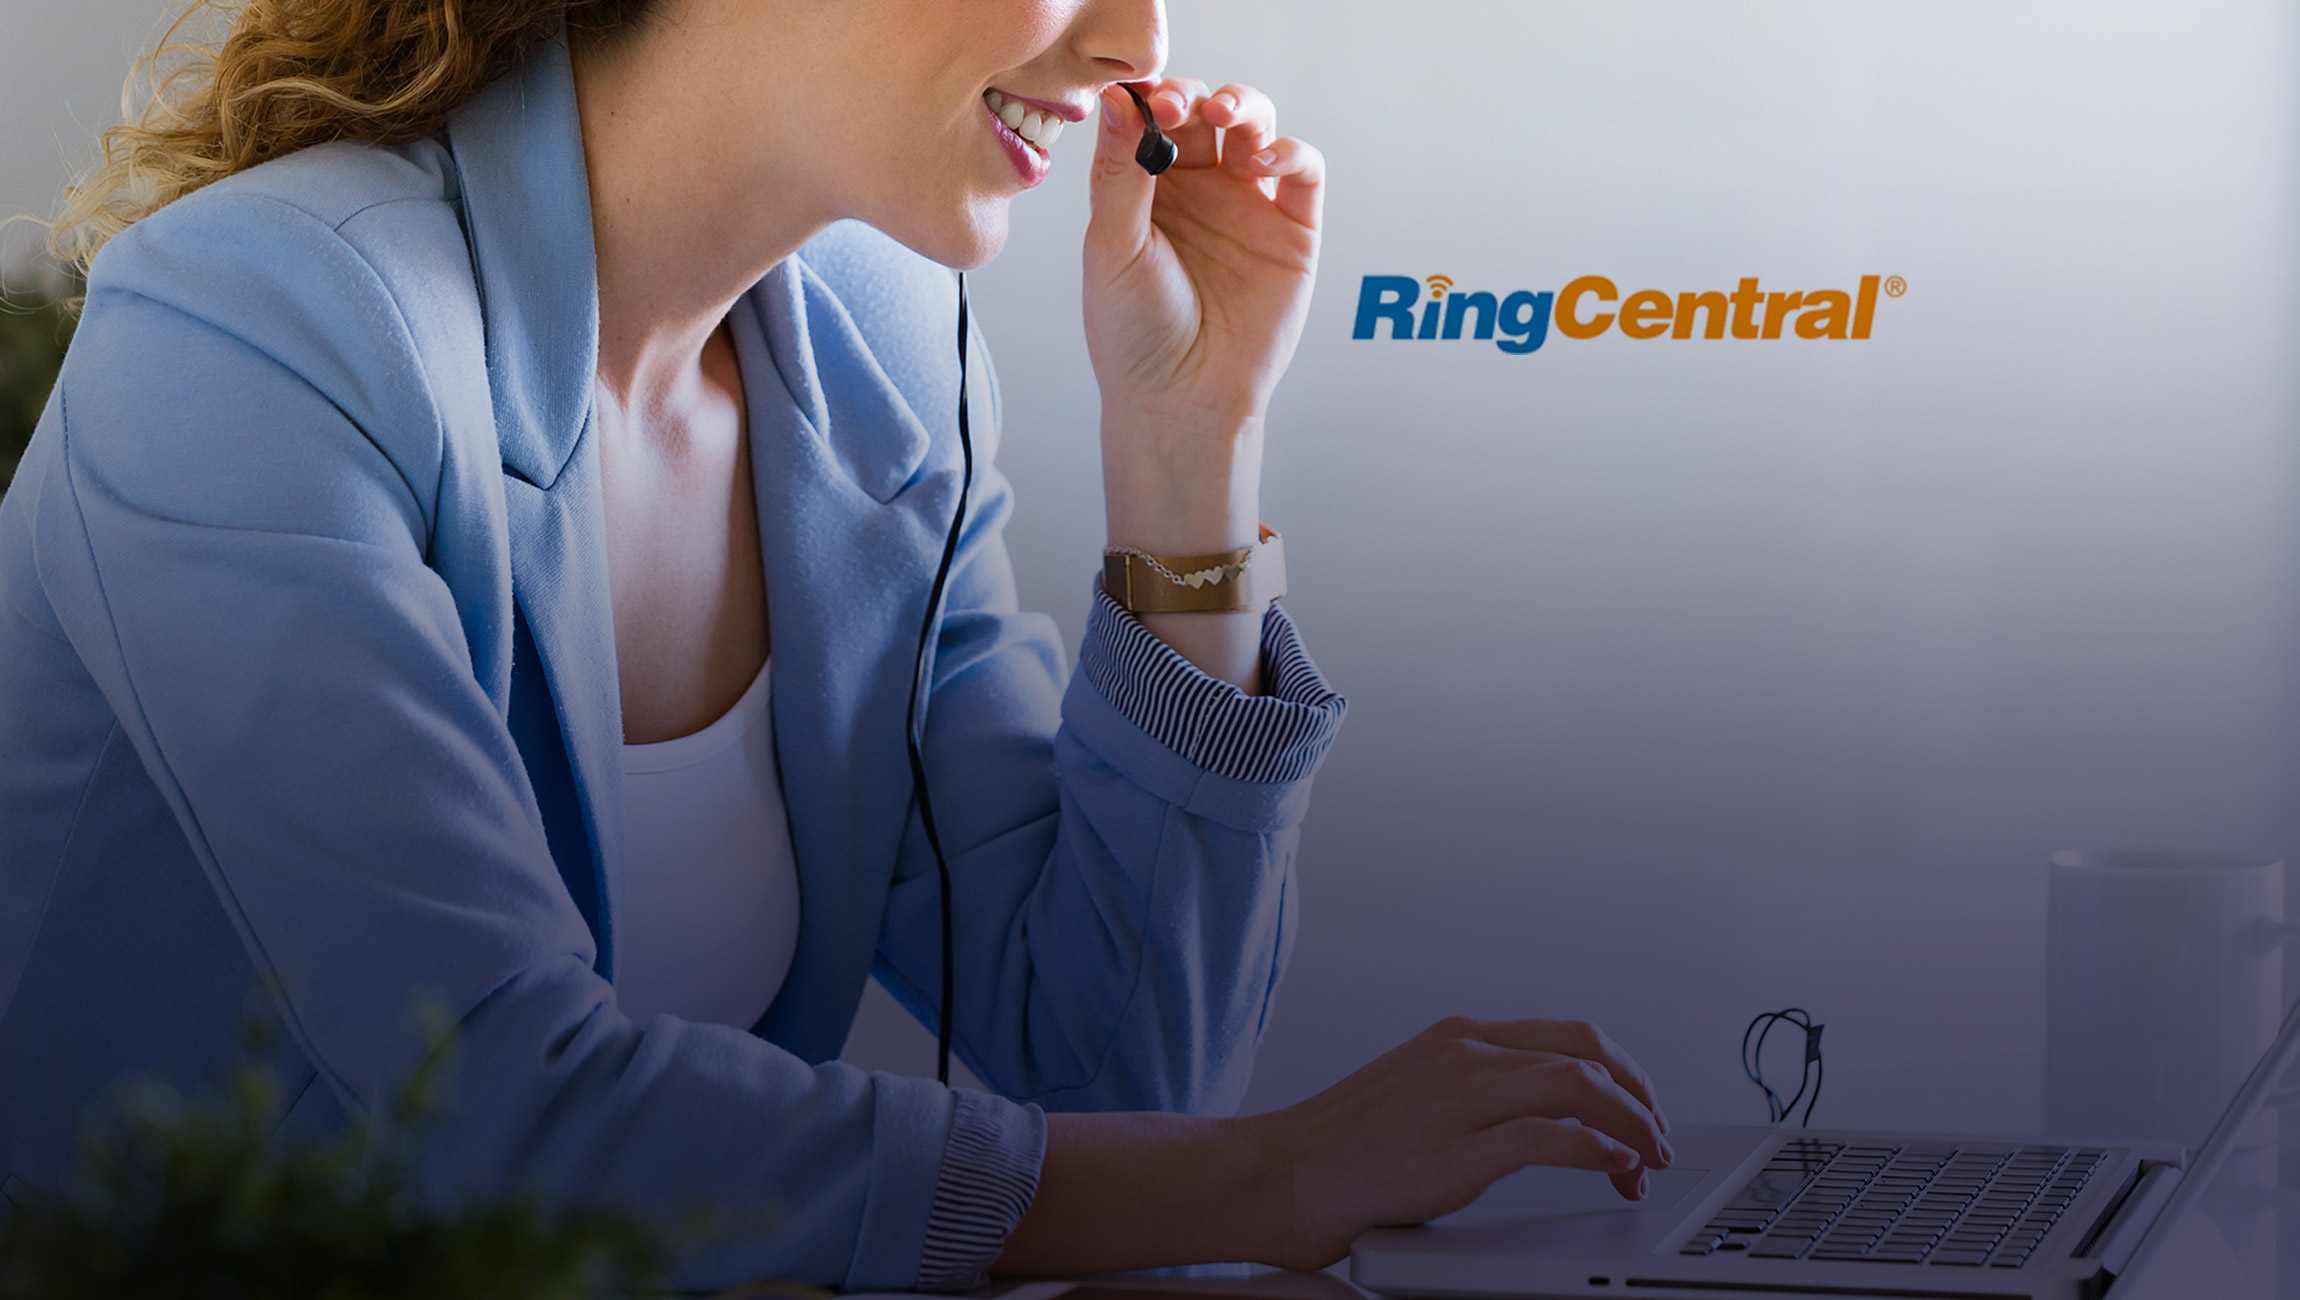 Ryder Turns to RingCentral Cloud Communications to Improve Service, Enhance Mobility, and Empower Call Center Agents